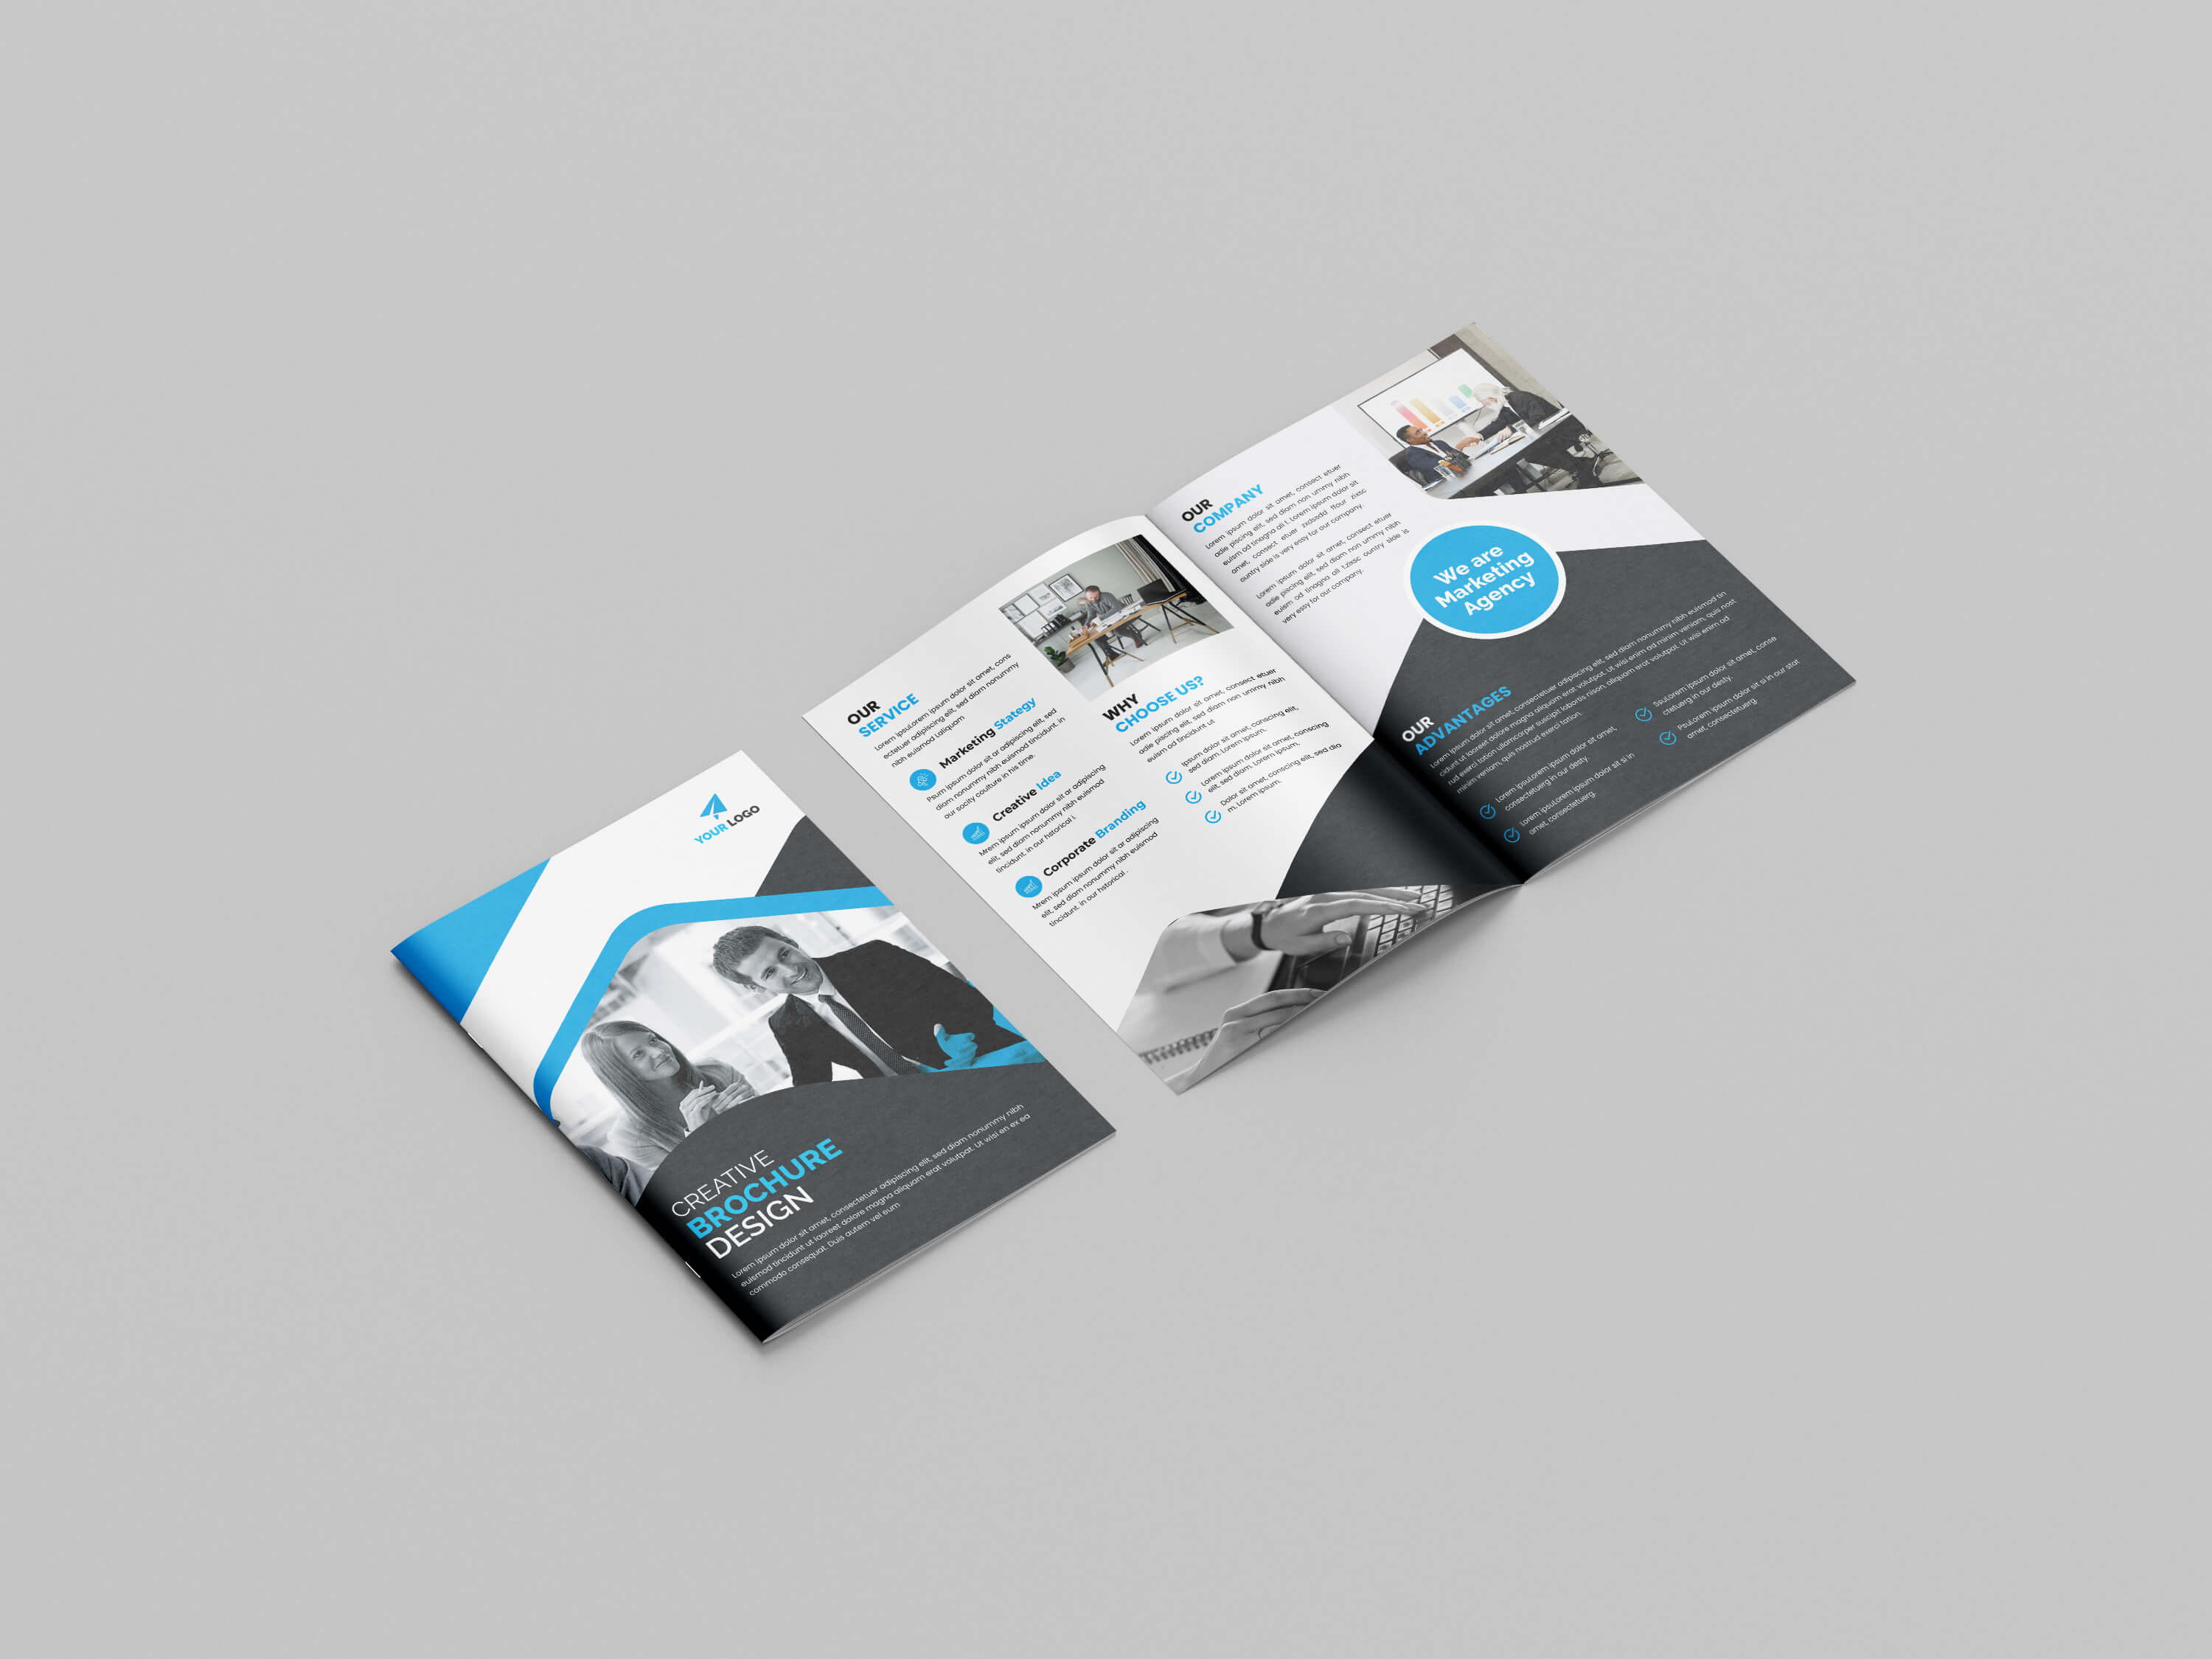 Image of an unfolded brochure with a beautiful design